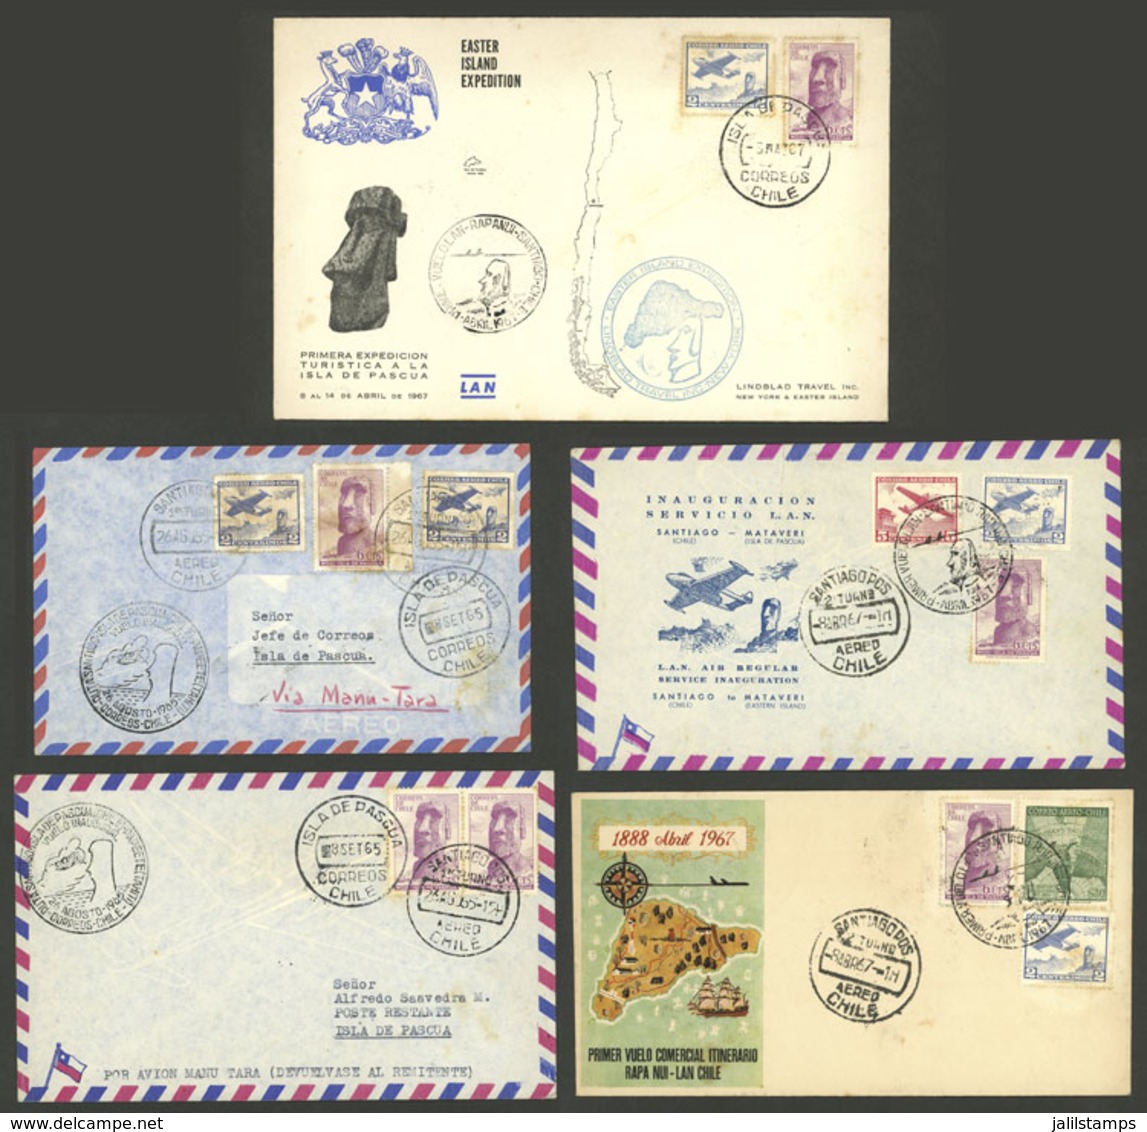 CHILE: Flights To EASTER ISLAND: 5 Covers Sent From Santiago To Rapanui Or The Other Way Around In 1967, Several Are LAN - Chili